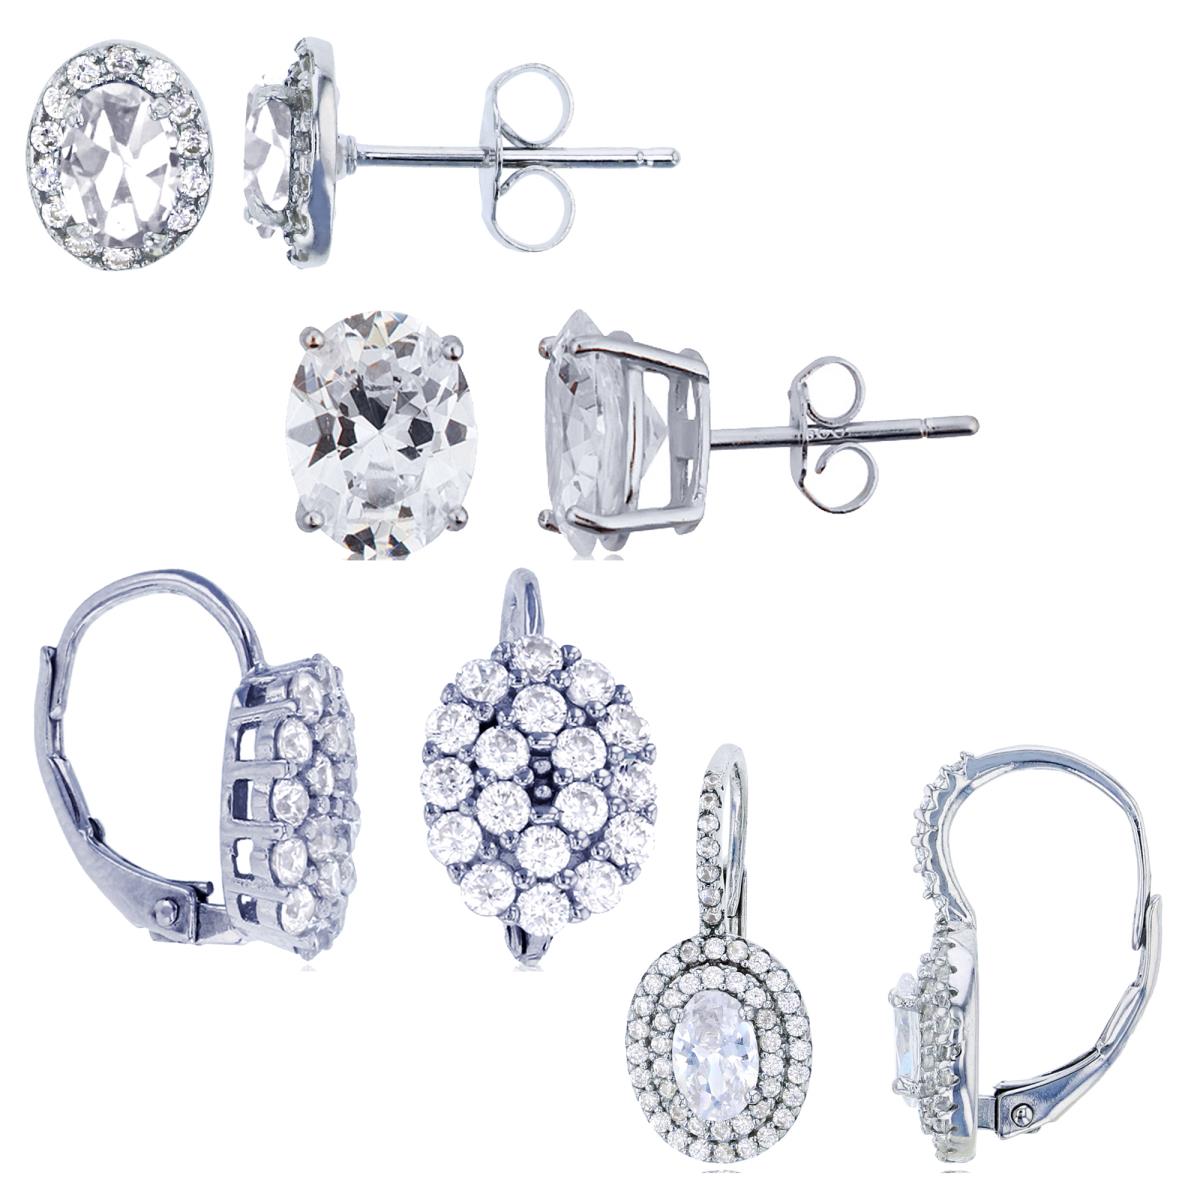 Sterling Silver Rhodium 6x4mm Ov Studs/ 9x7mm Ov Solitaire Studs & Earrings with Leverbacks 4-Units Set